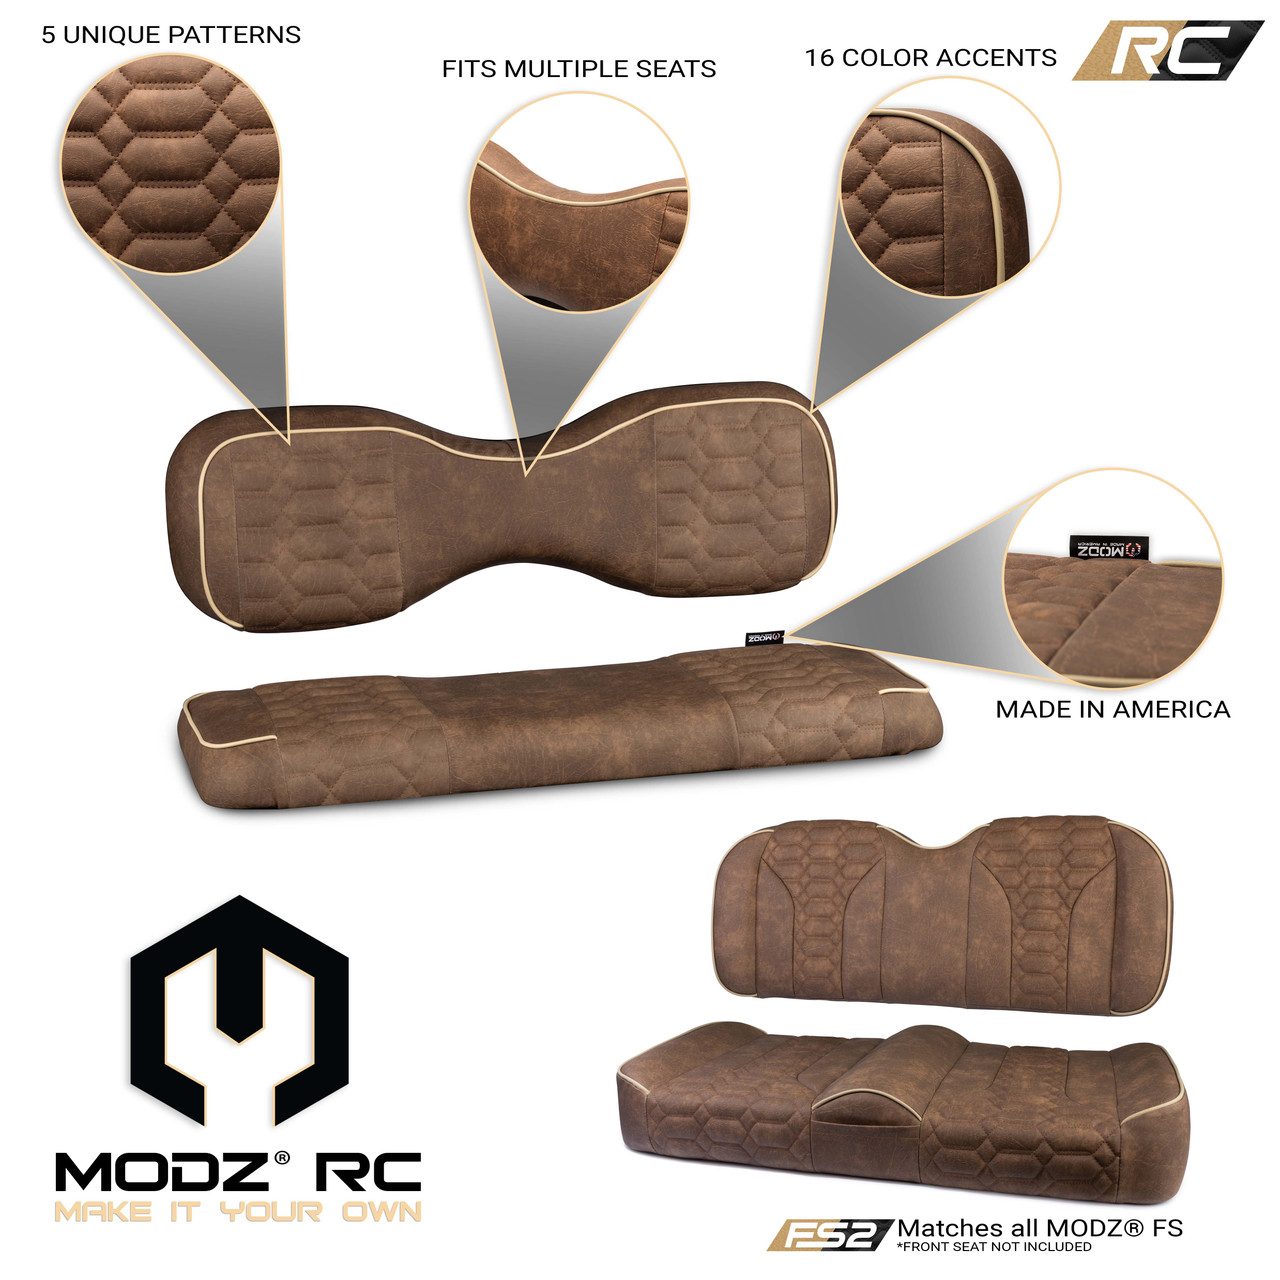 MODZ RC Custom Rear Seat Covers - Brown Base - Choose Pattern and Accent Colors